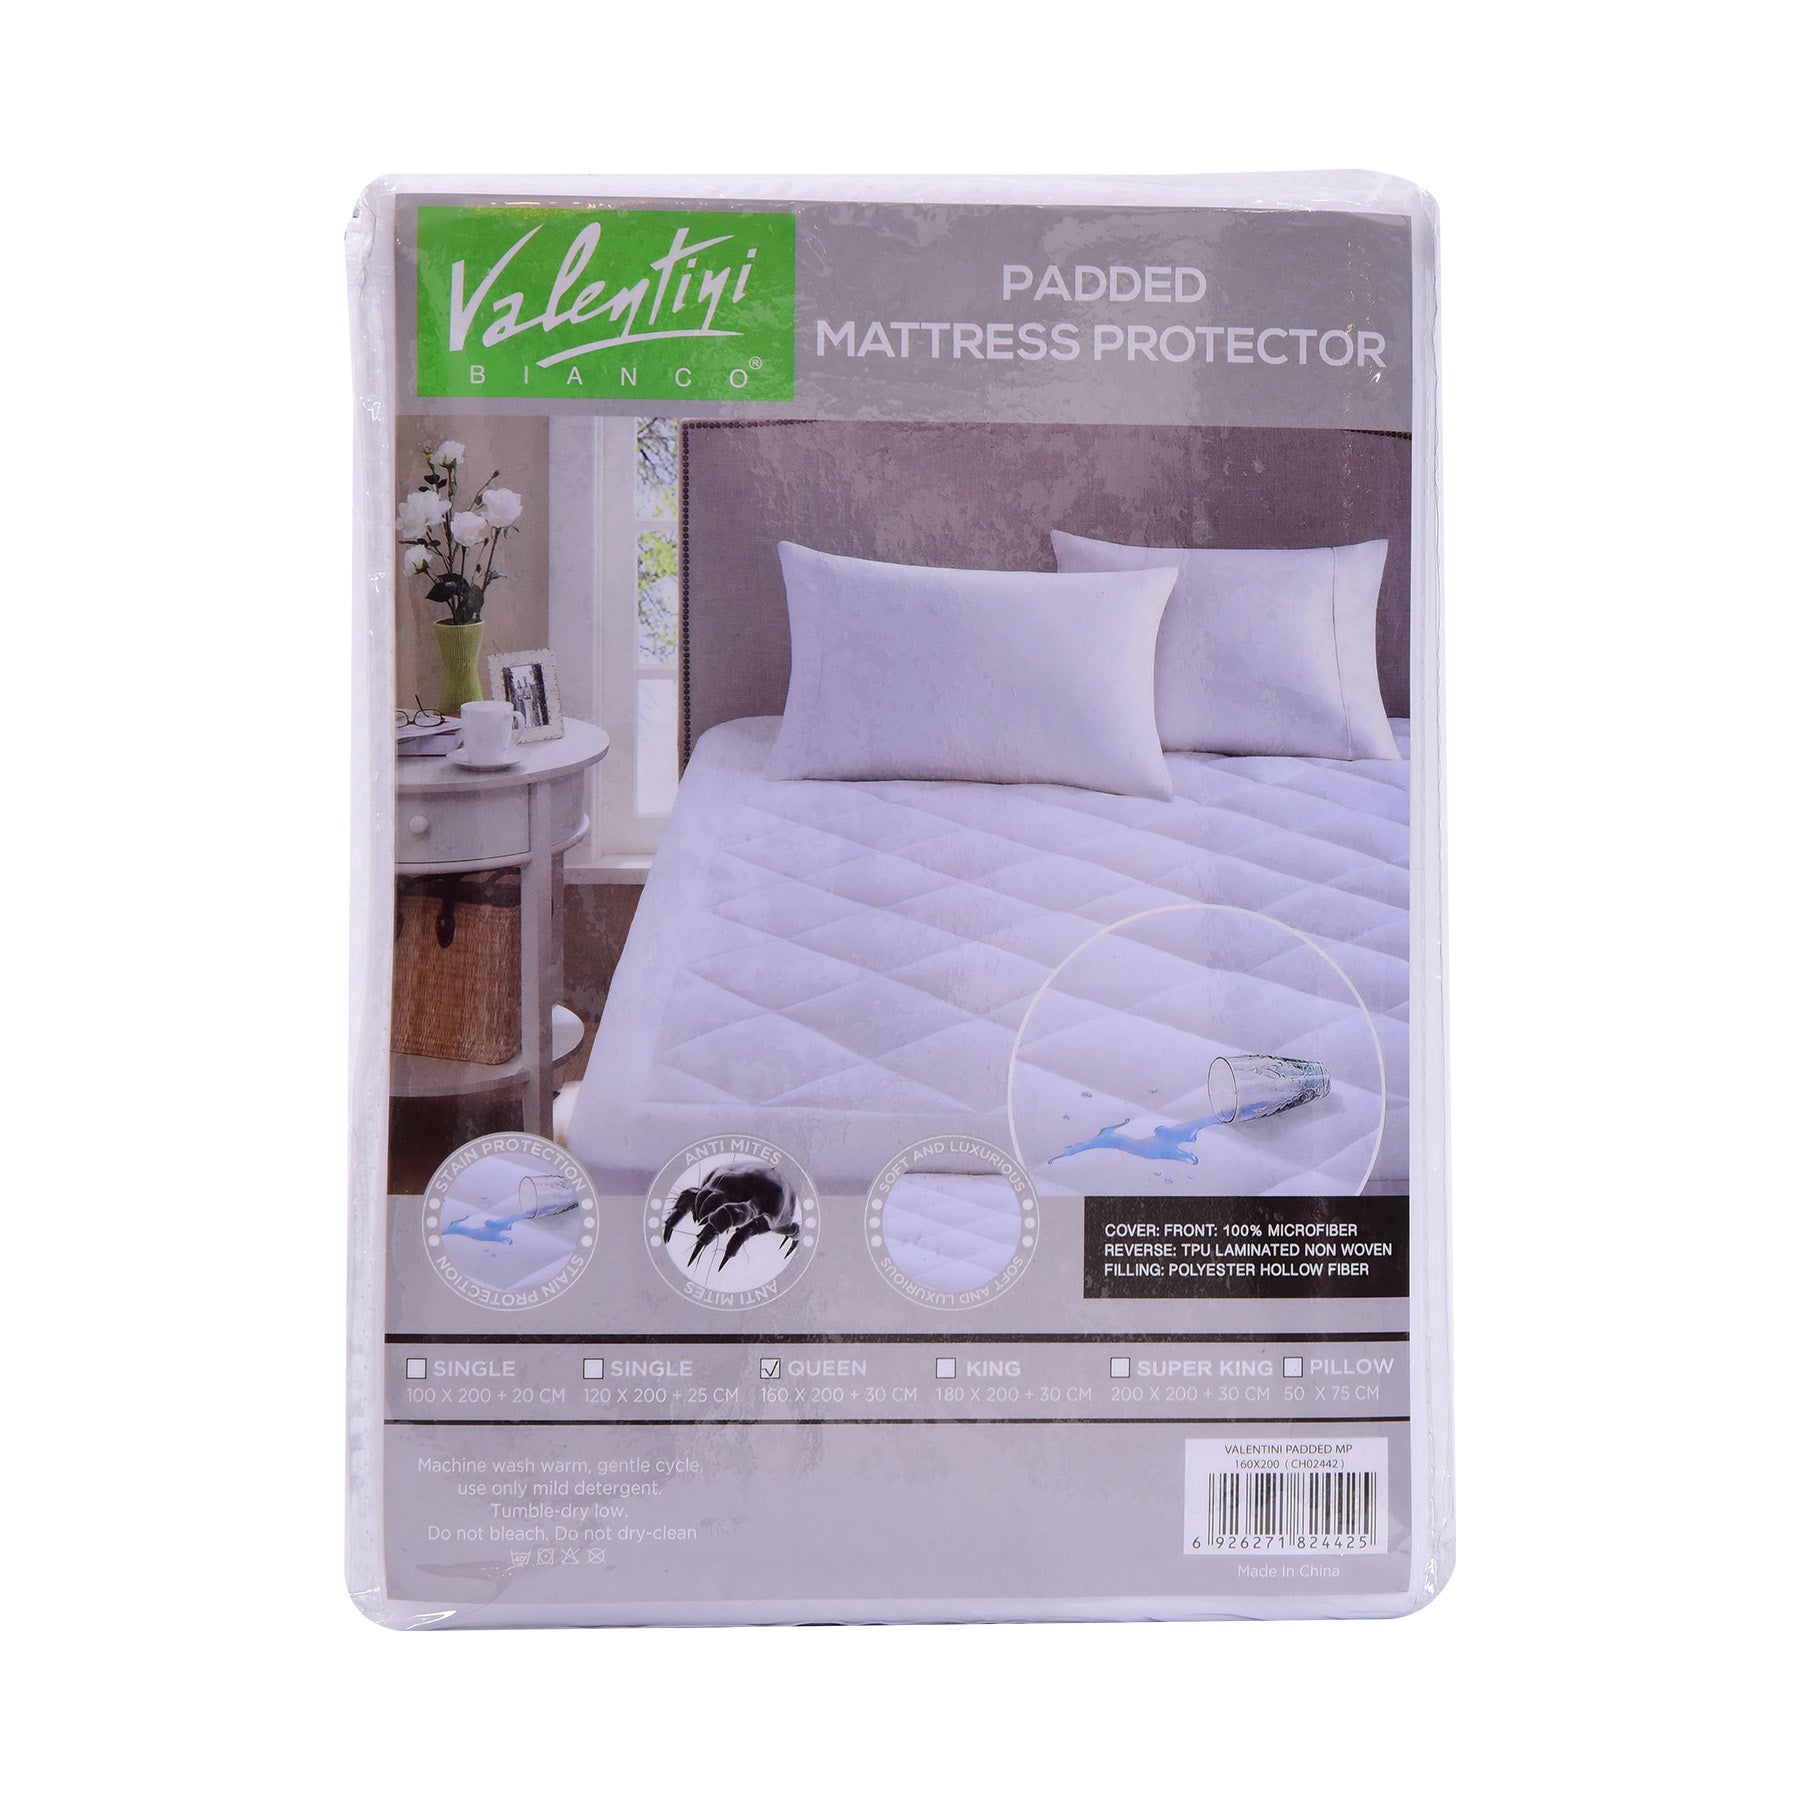 Padded Mattress Protector , QueenSize : 160 x 200 + 30 cm